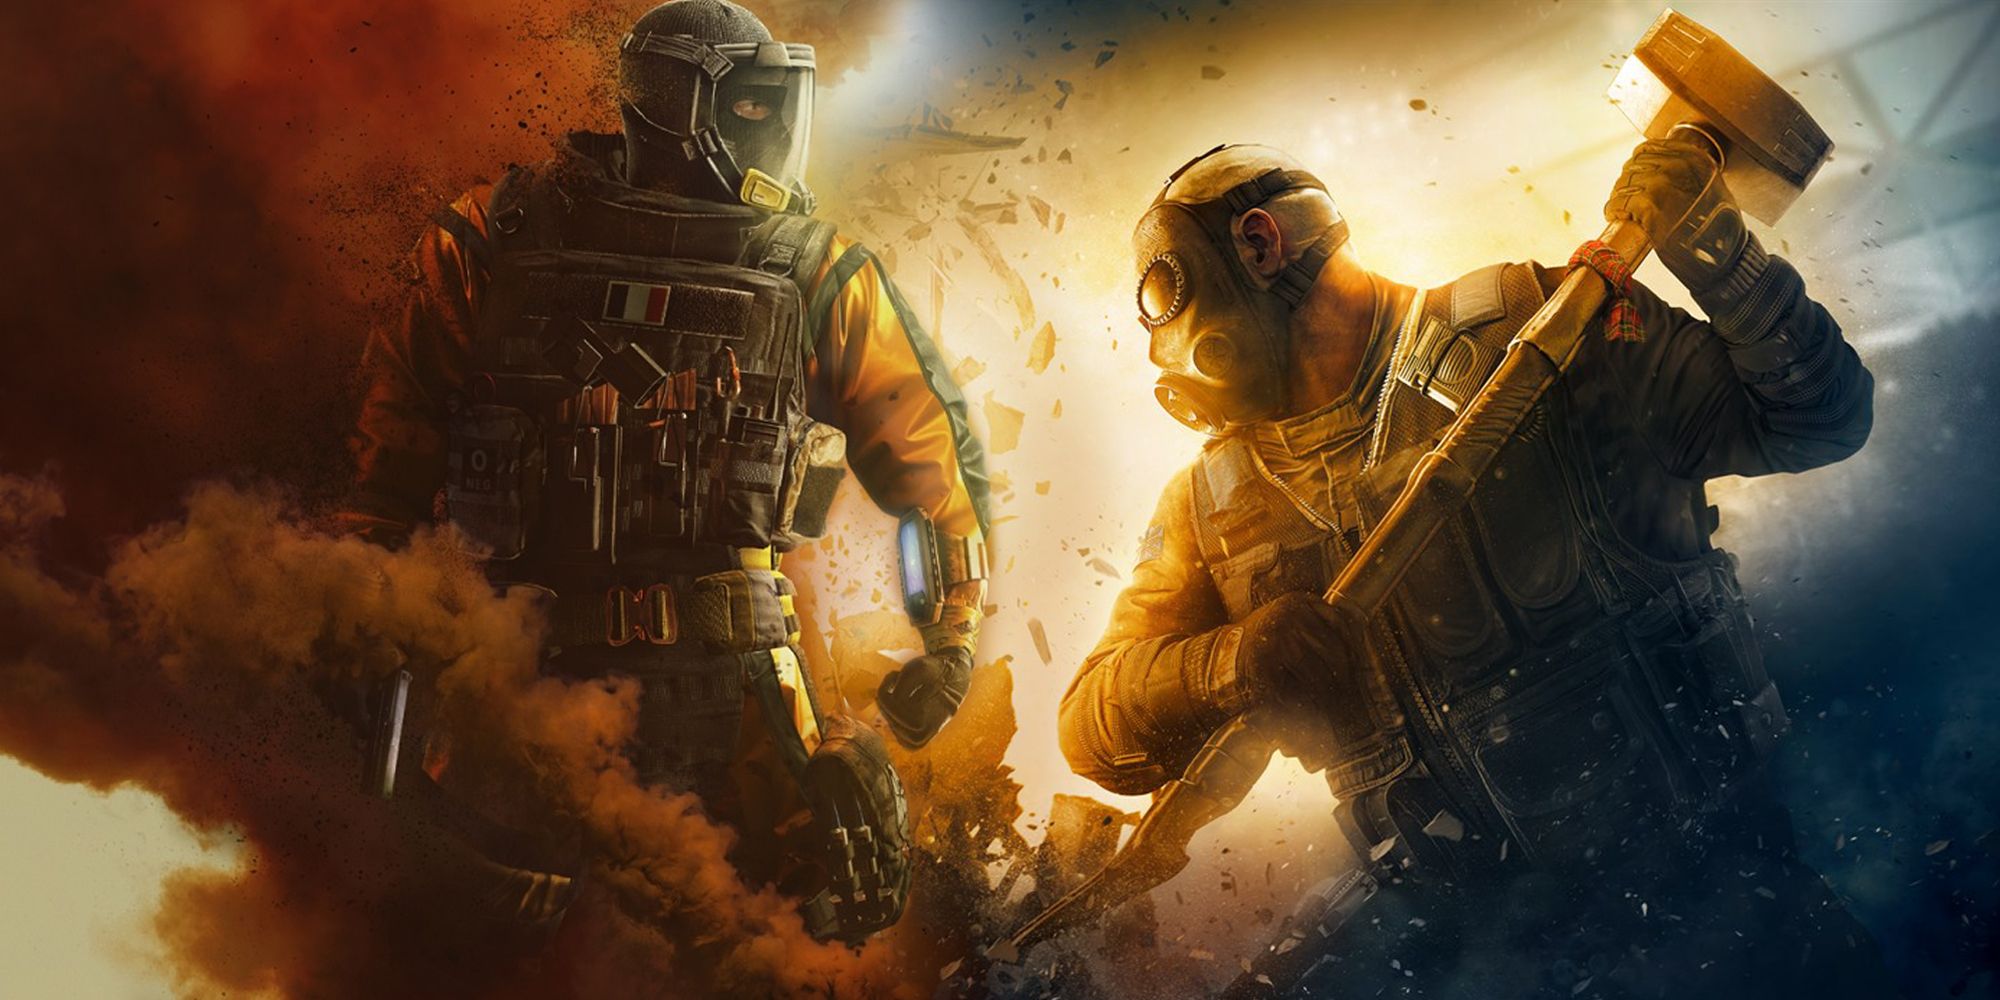 Rainbow six sieges crossplay multiplayer what platforms how